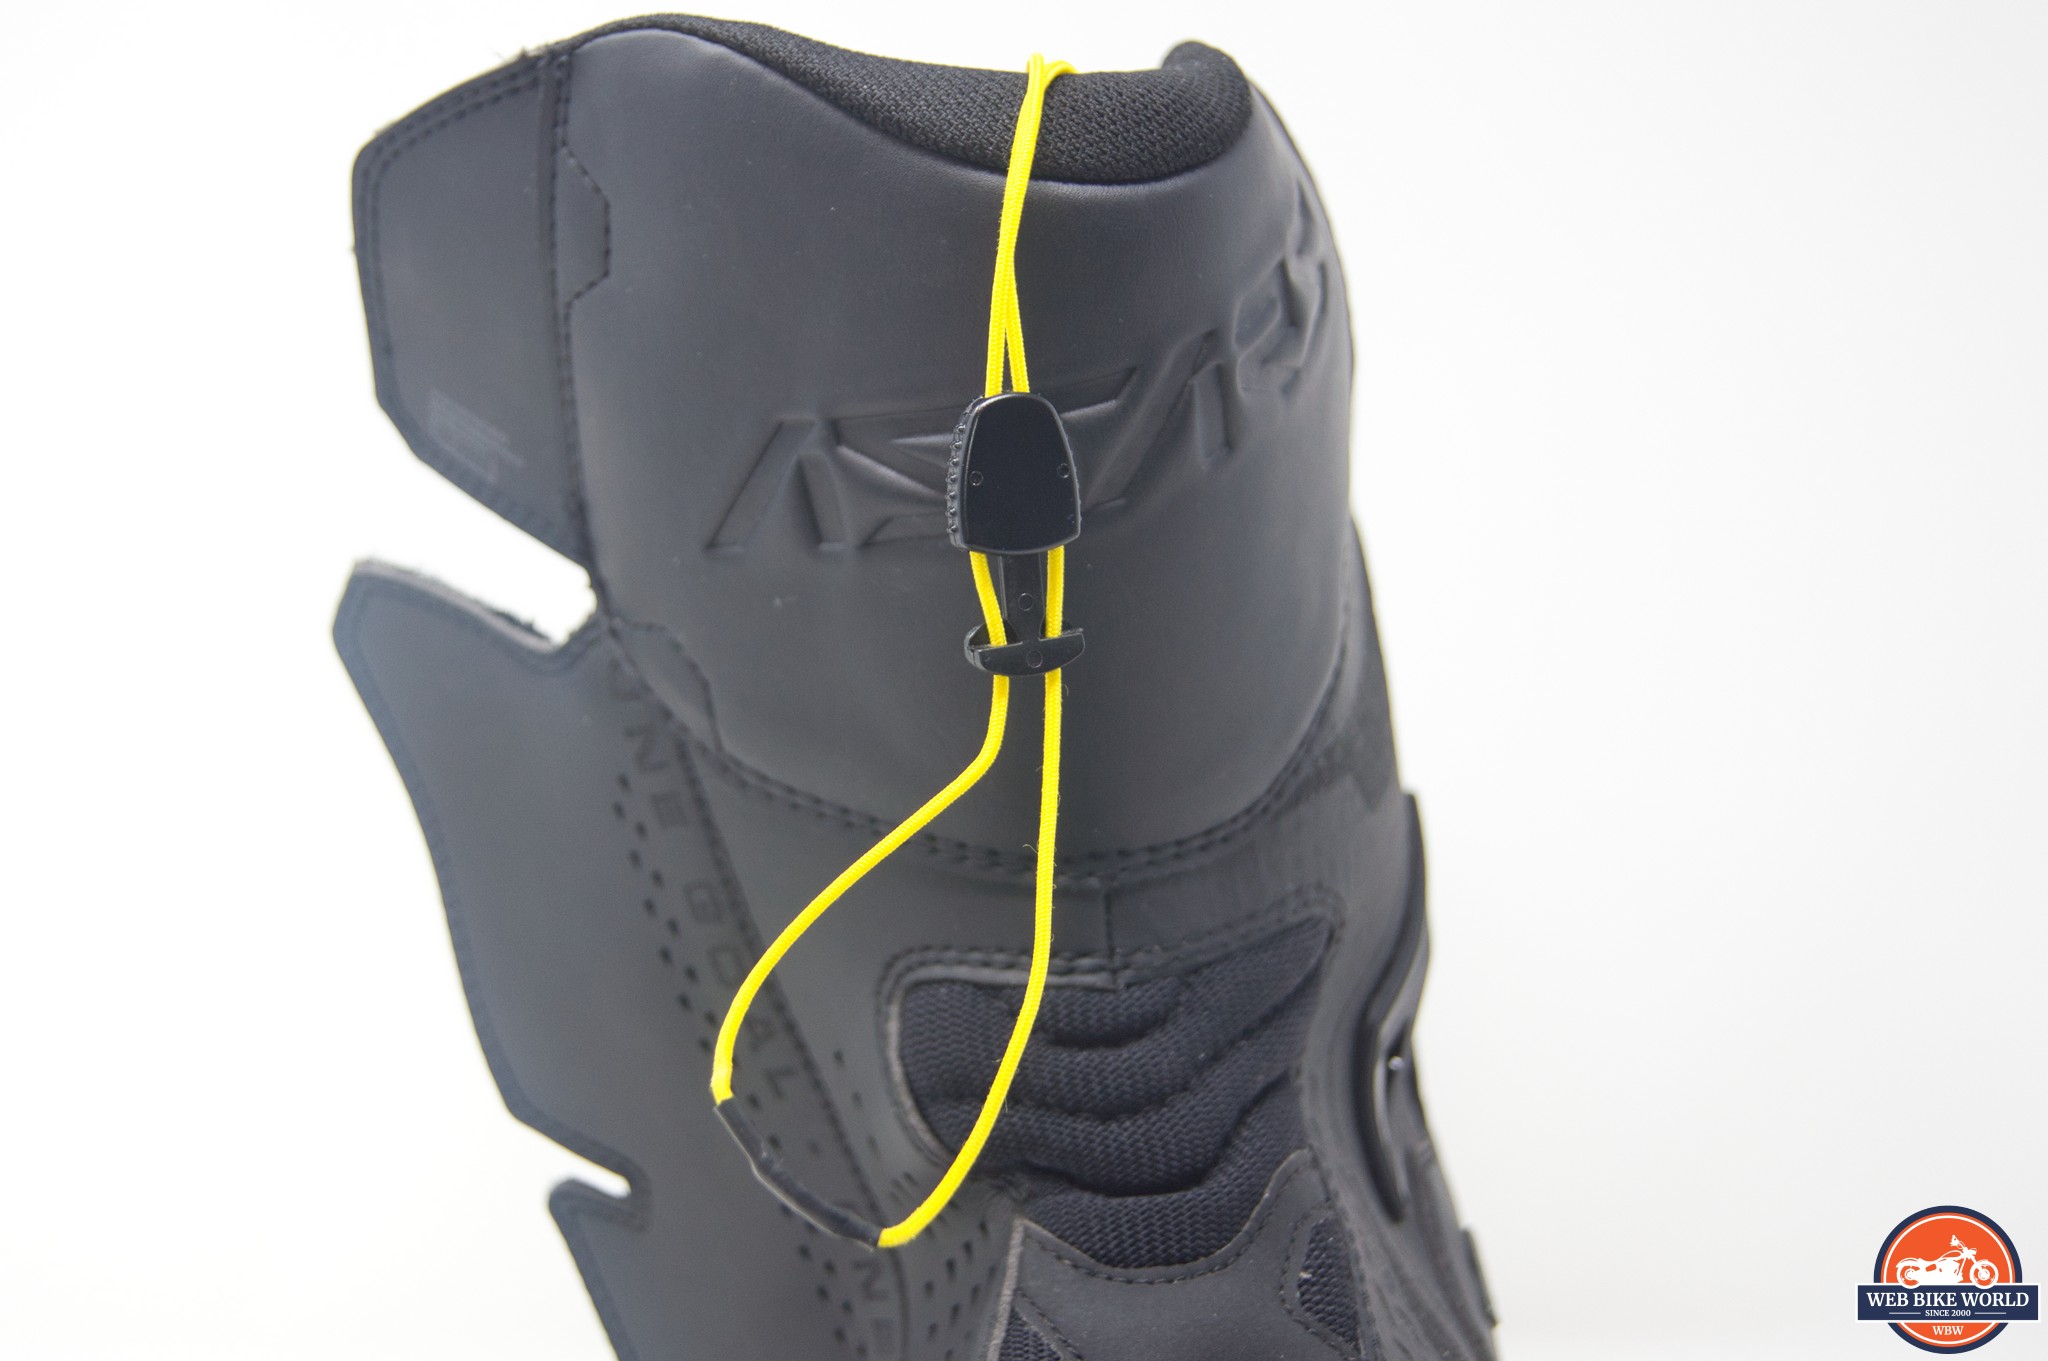 Adjustable string that allows you to tighten the boots